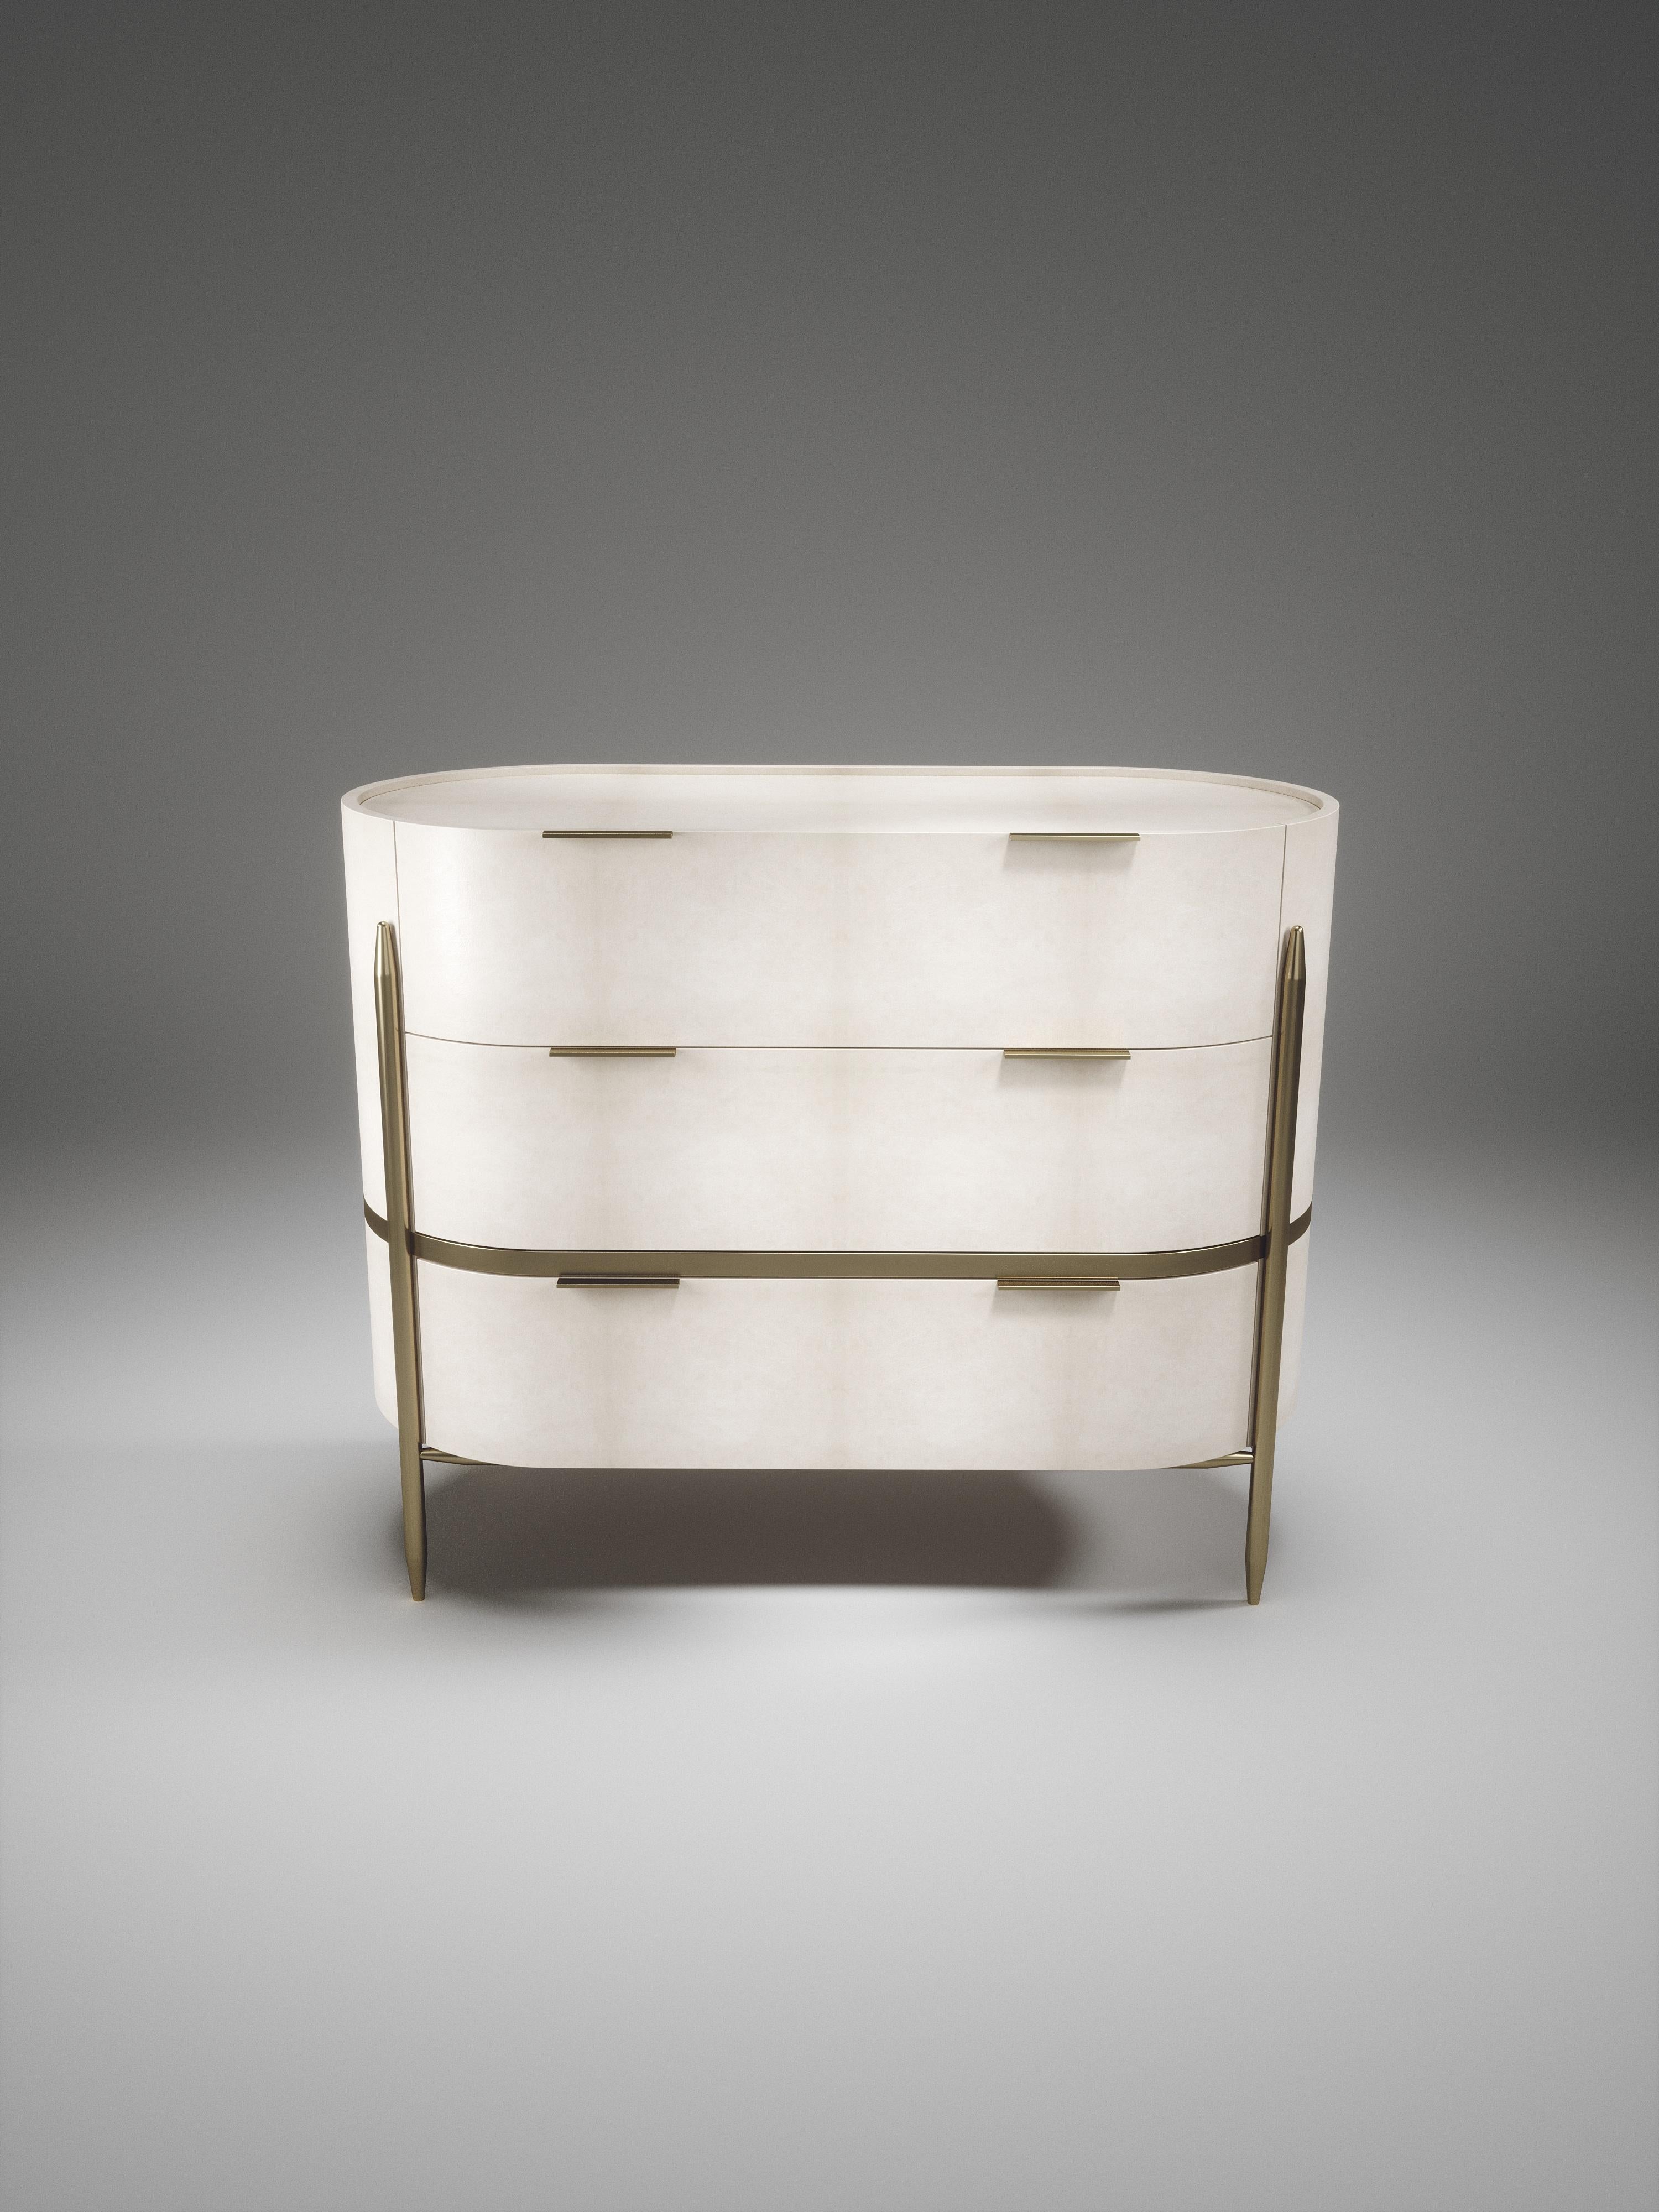 The Dandy oval chest of drawers by Kifu Paris is an elegant and a luxurious home accent, inlaid in cream parchment with bronze-patina brass details. This piece includes 3 drawers total and the interiors are inlaid in gemelina wood veneer. Available